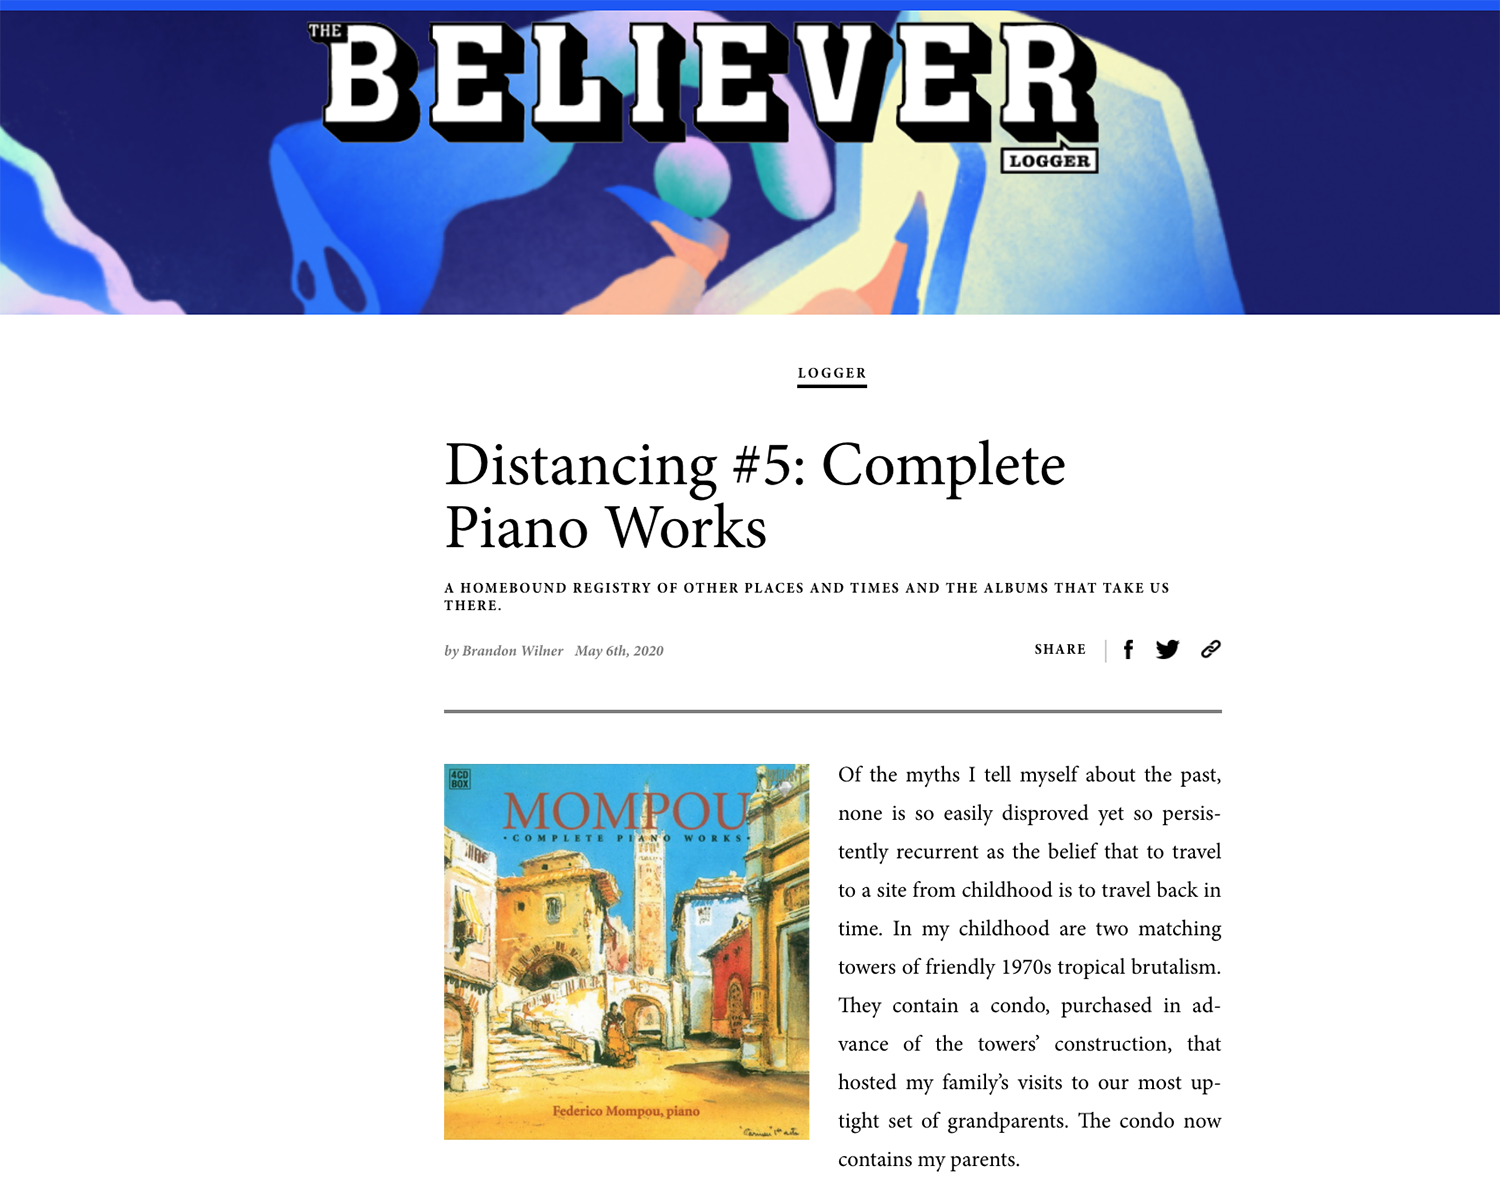 The Believer, Federico Mompou's Complete Piano Works